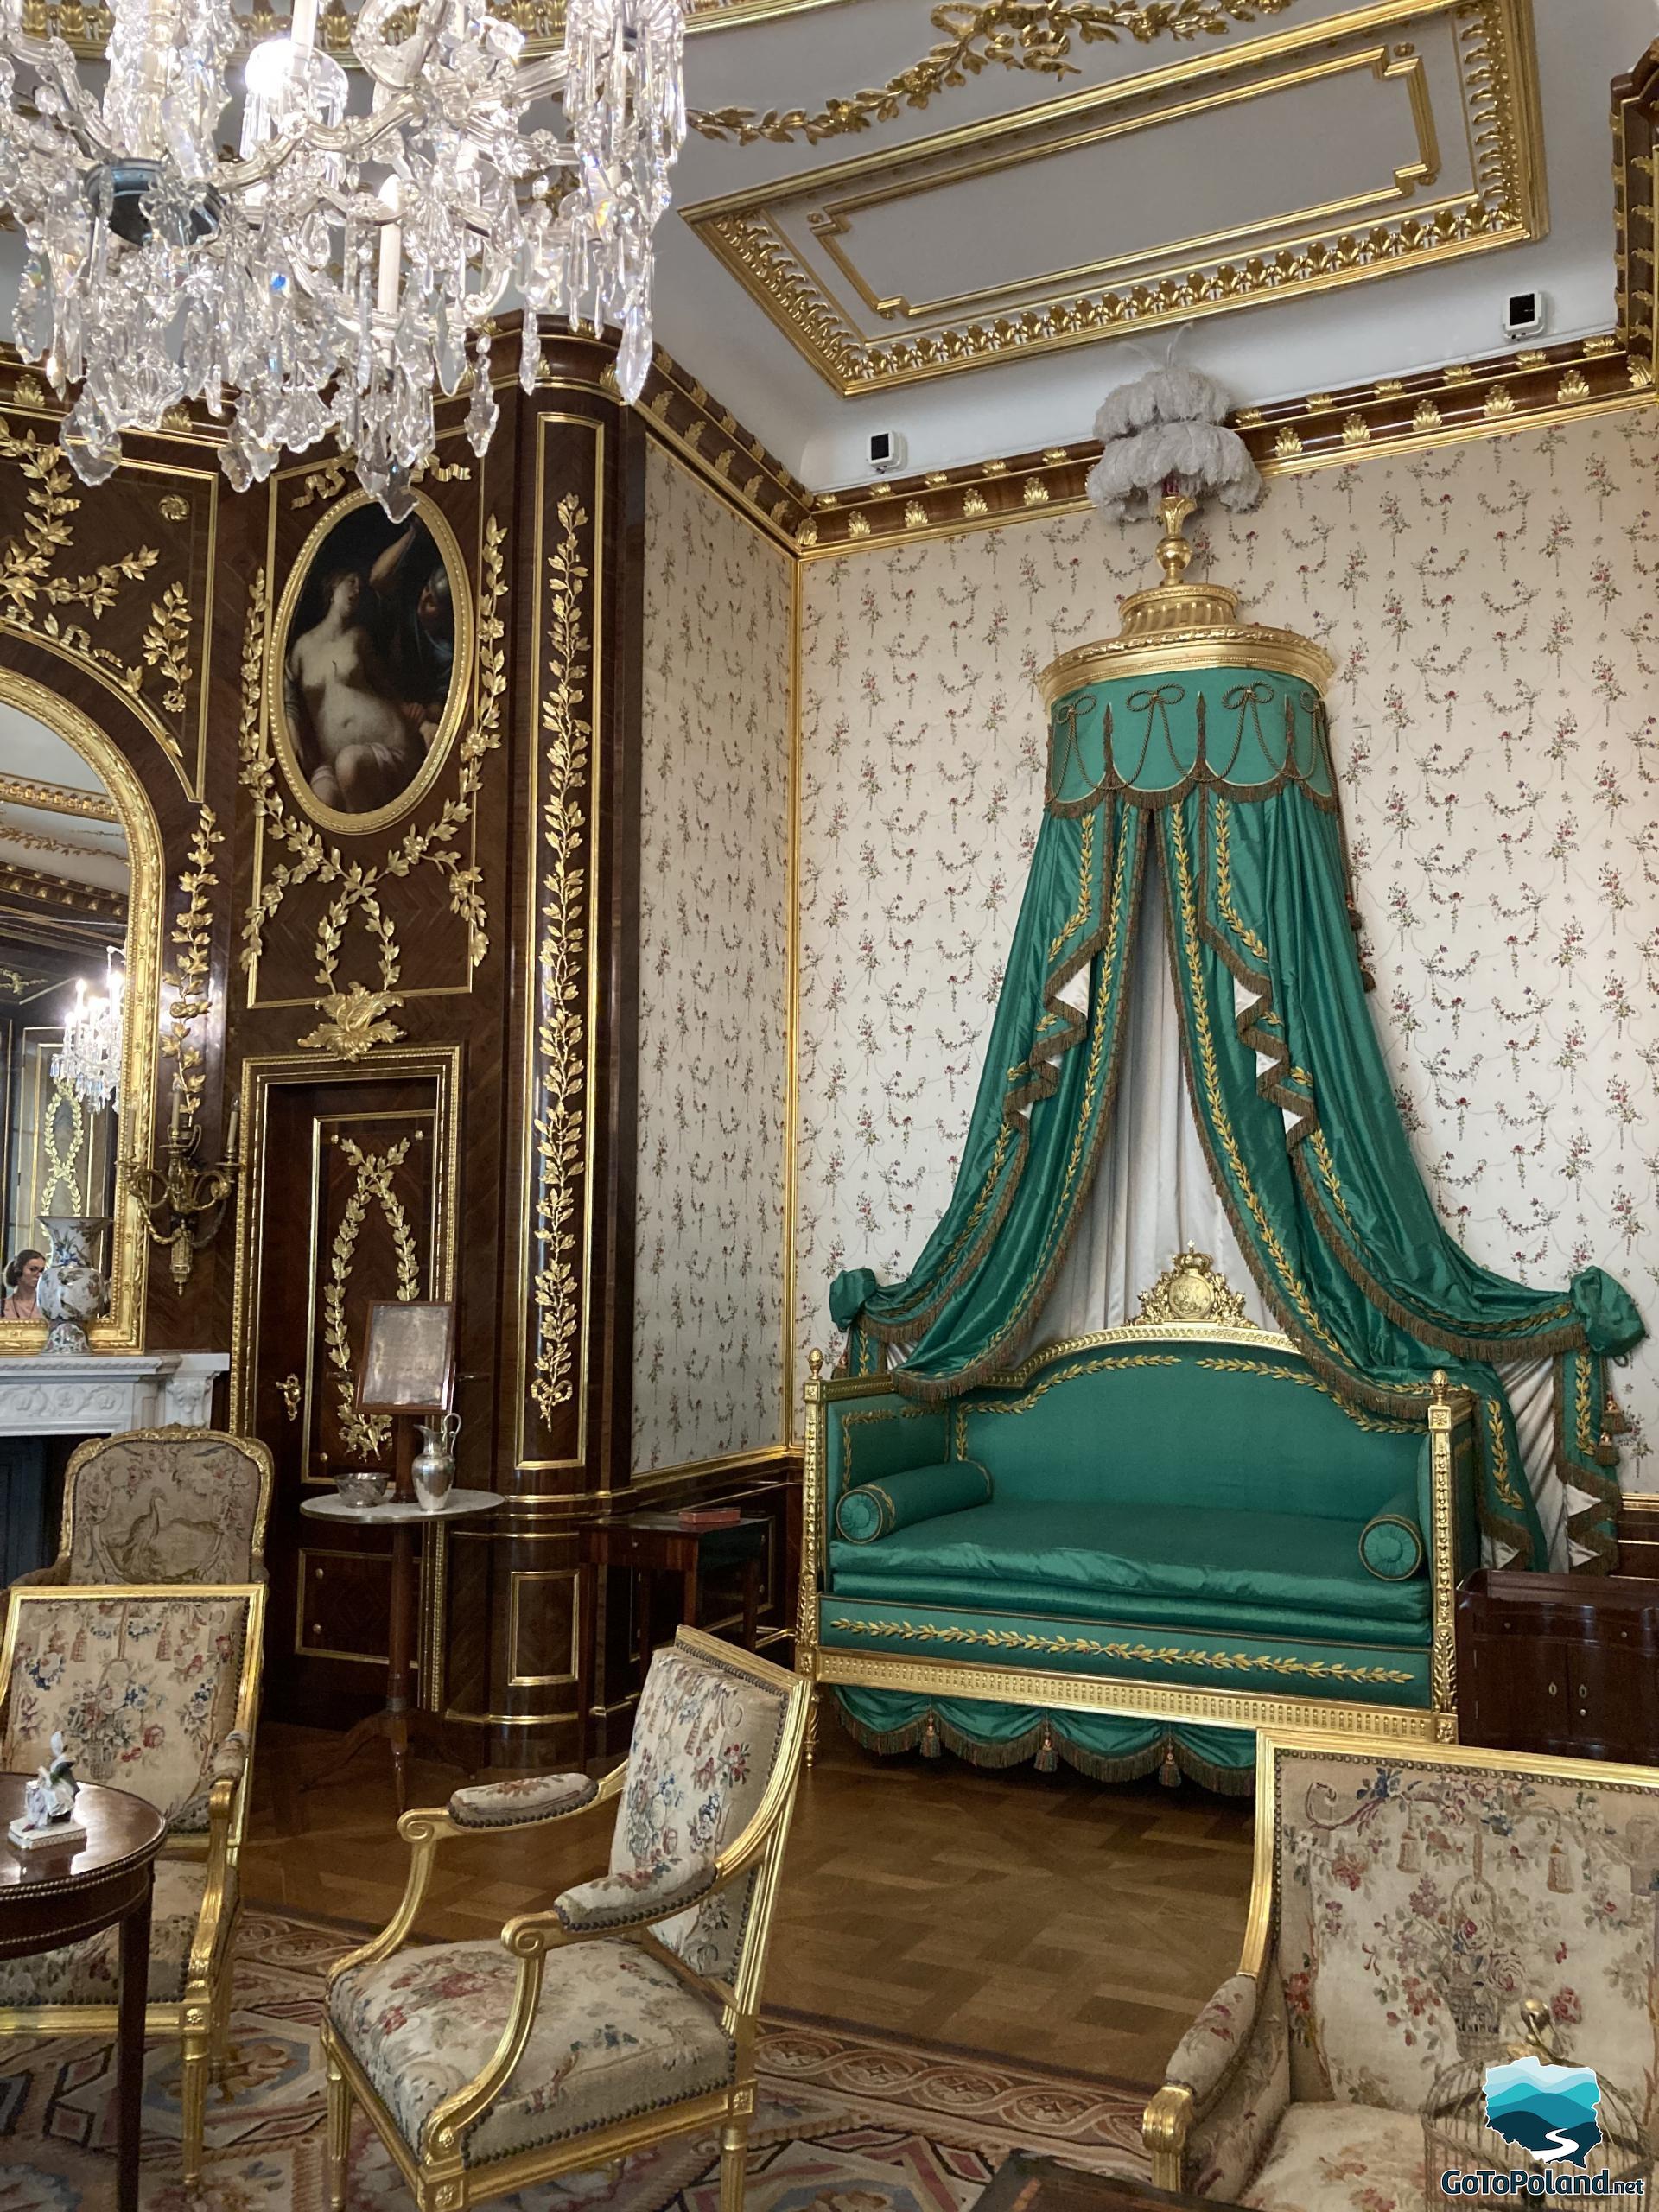 the hall is richly decorated, there is a crystal chandelier, chairs with golden backs, a mirror in a golden frame, a wall with golden leaves and a small green sofa or chaise with a green canopy